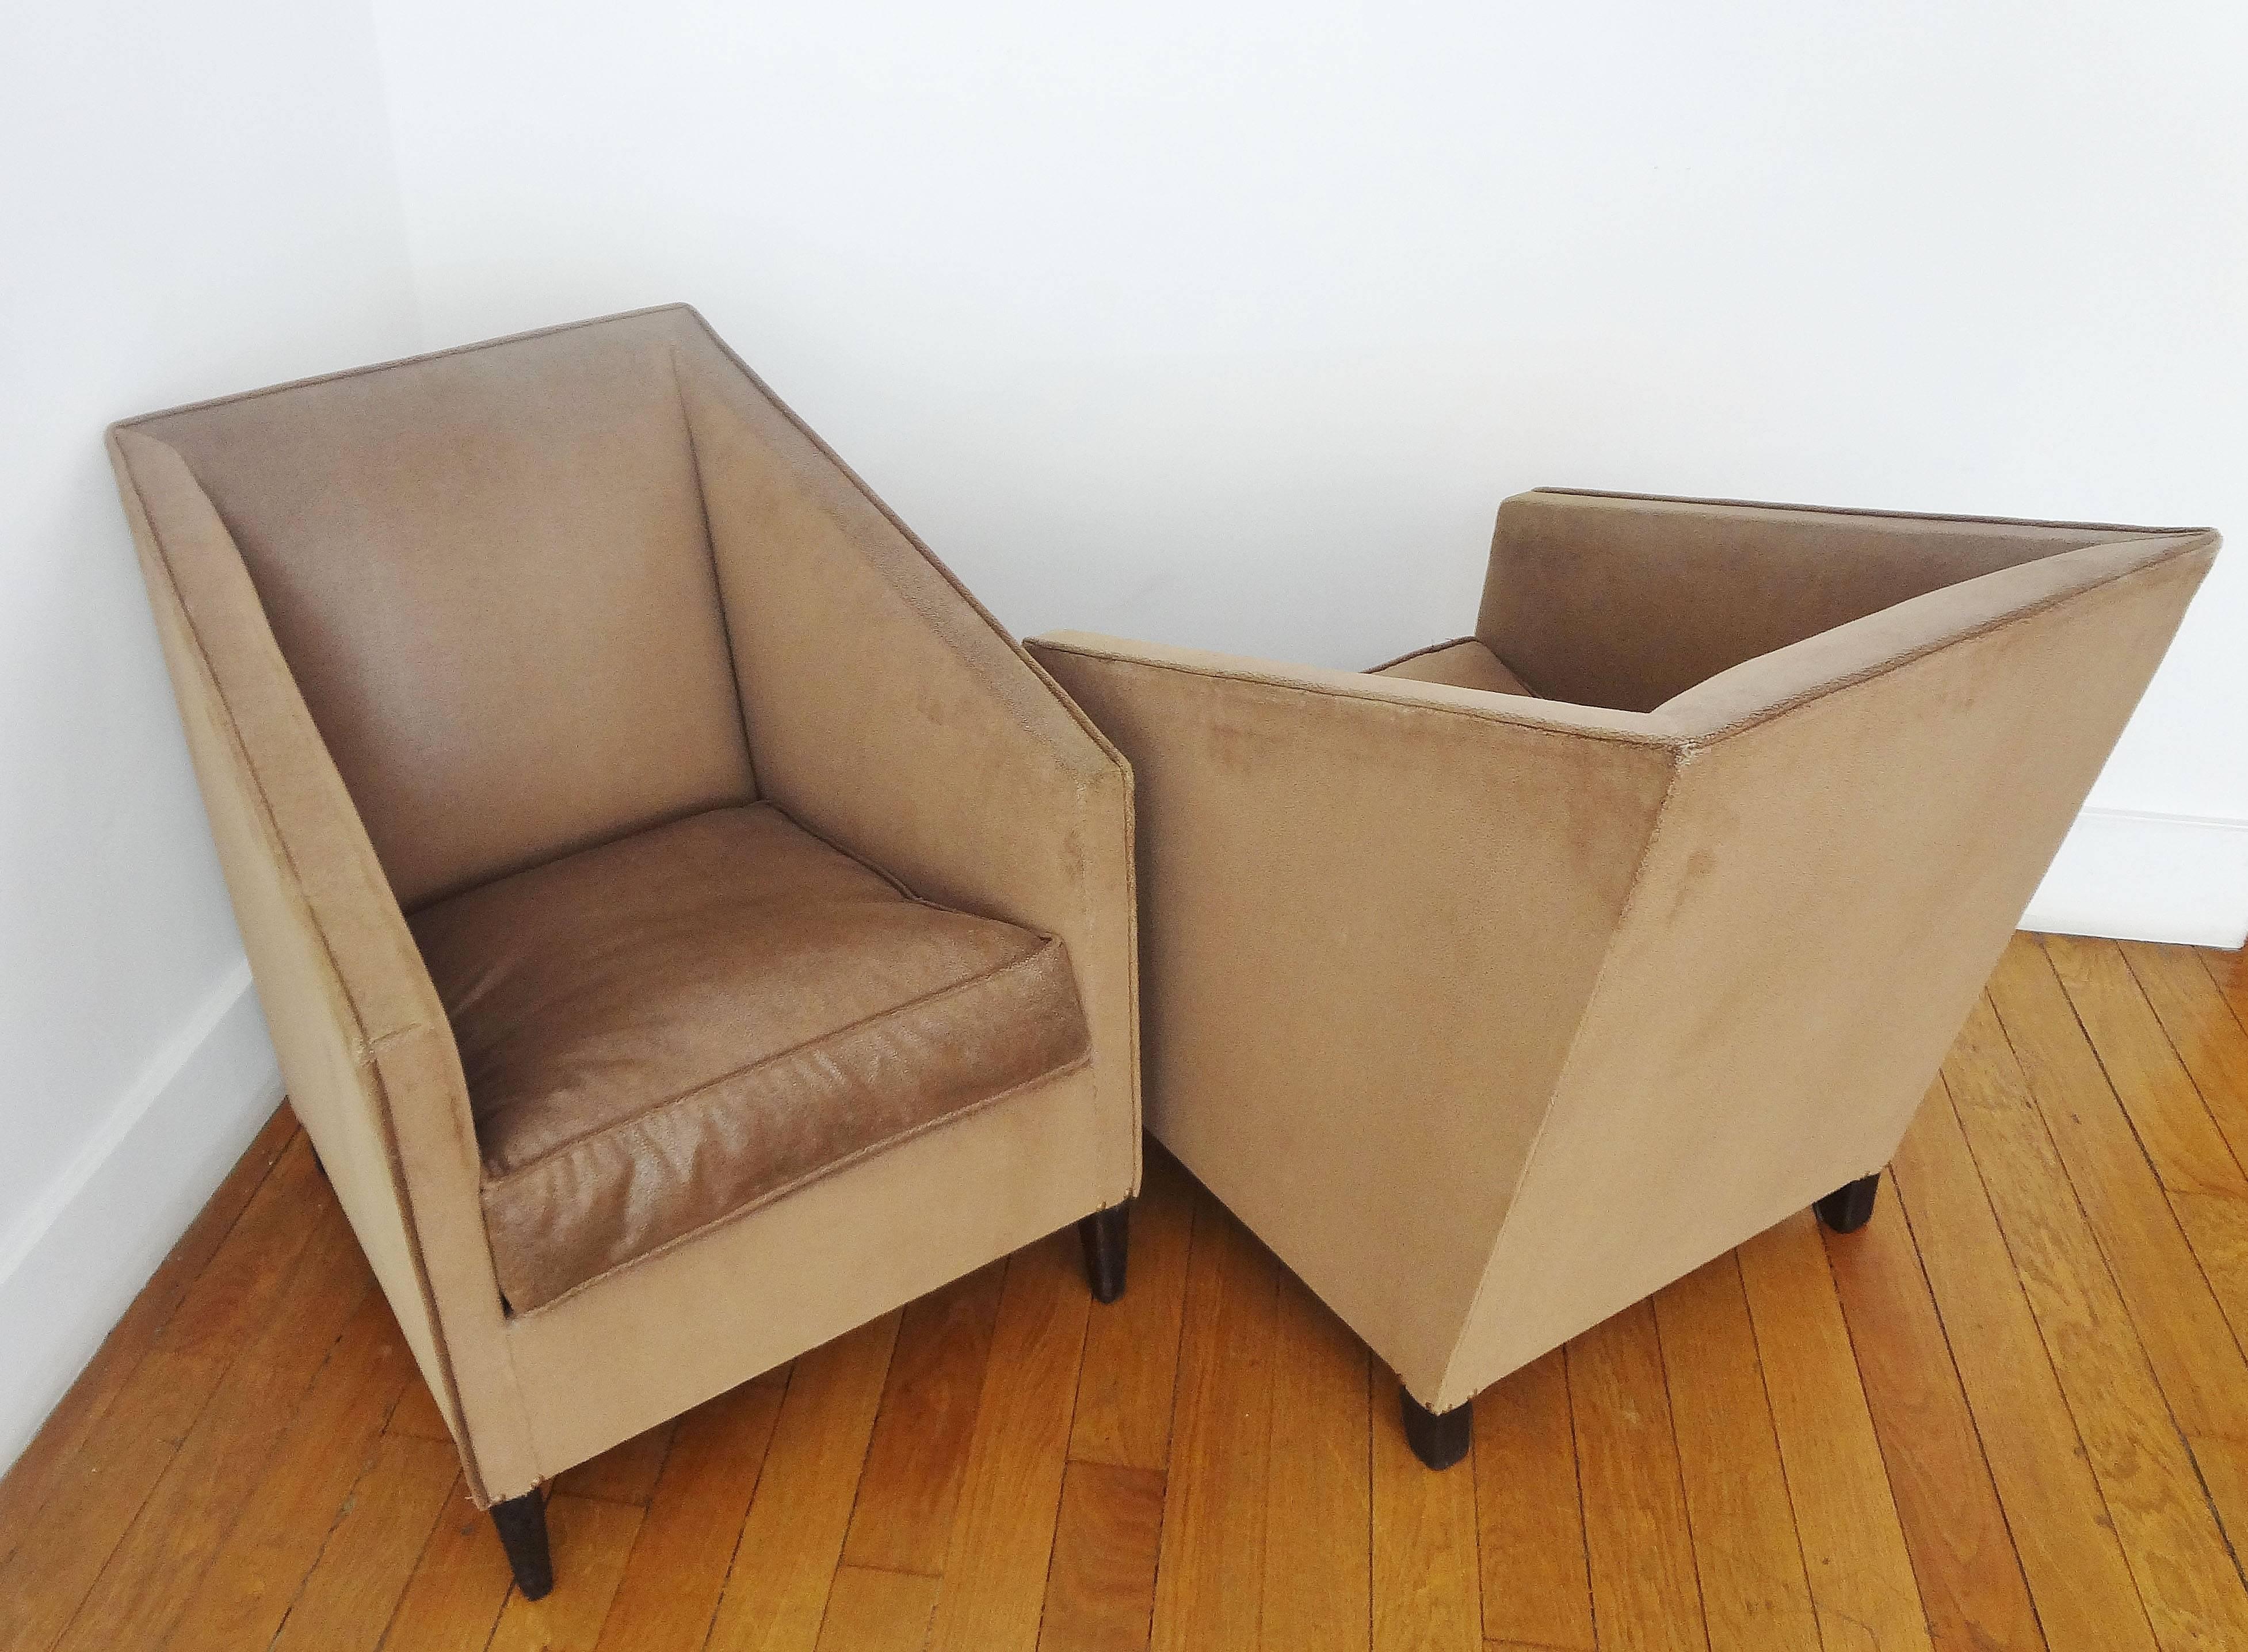 Art Deco Pair of Modernist Armchairs, 1920s, by Francis Jourdain For Sale